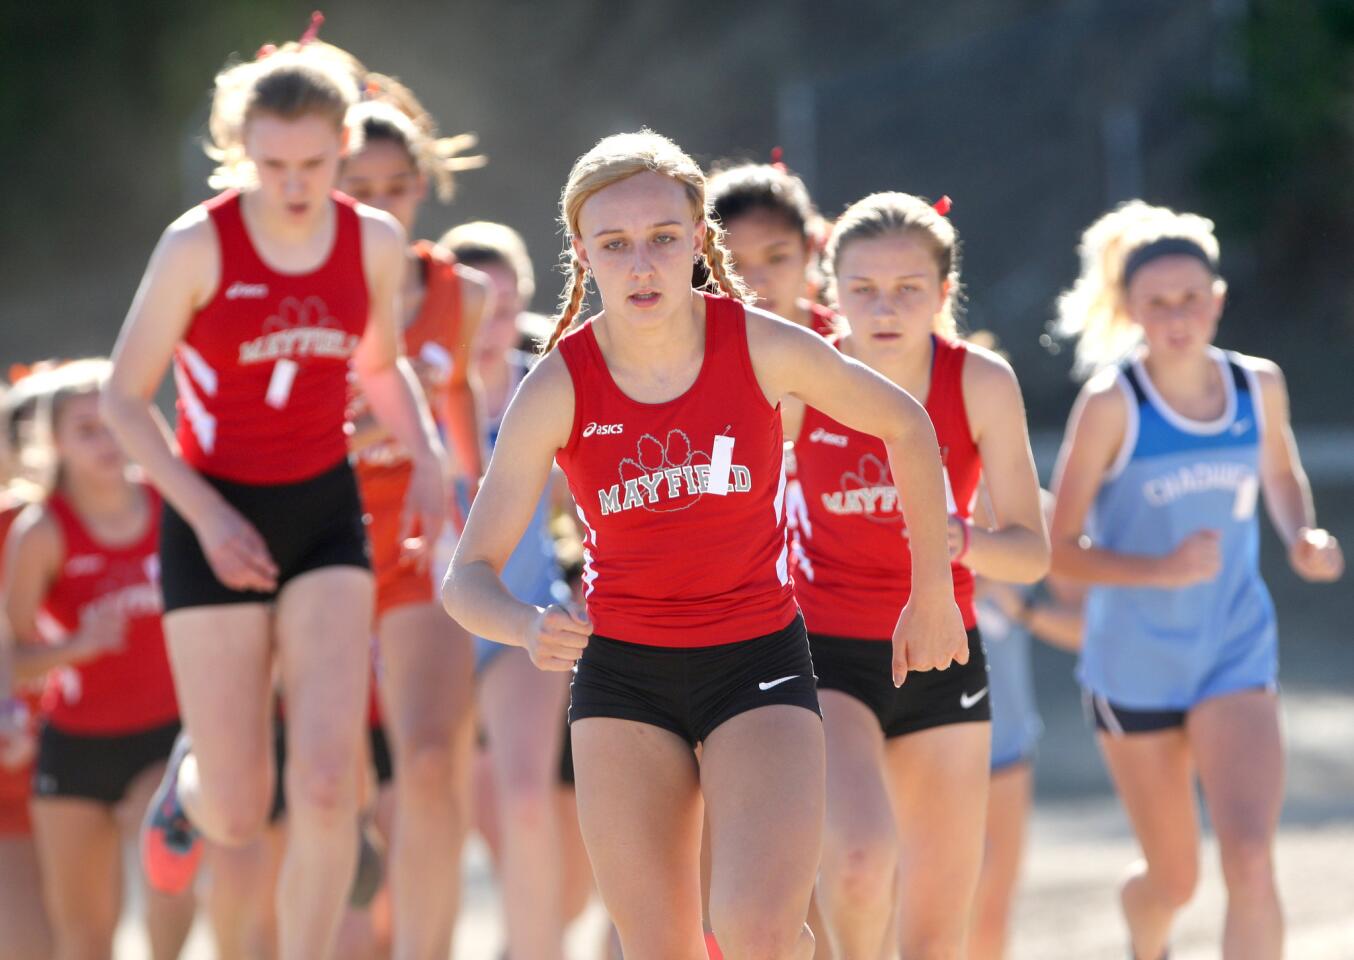 Mayfield High School girls' varsity cross country runner Emily Serhan ran her way to first place in the Prep League Cross Country Finals at Pierce College in Woodland Hills on Saturday, Oct. 31, 2015.